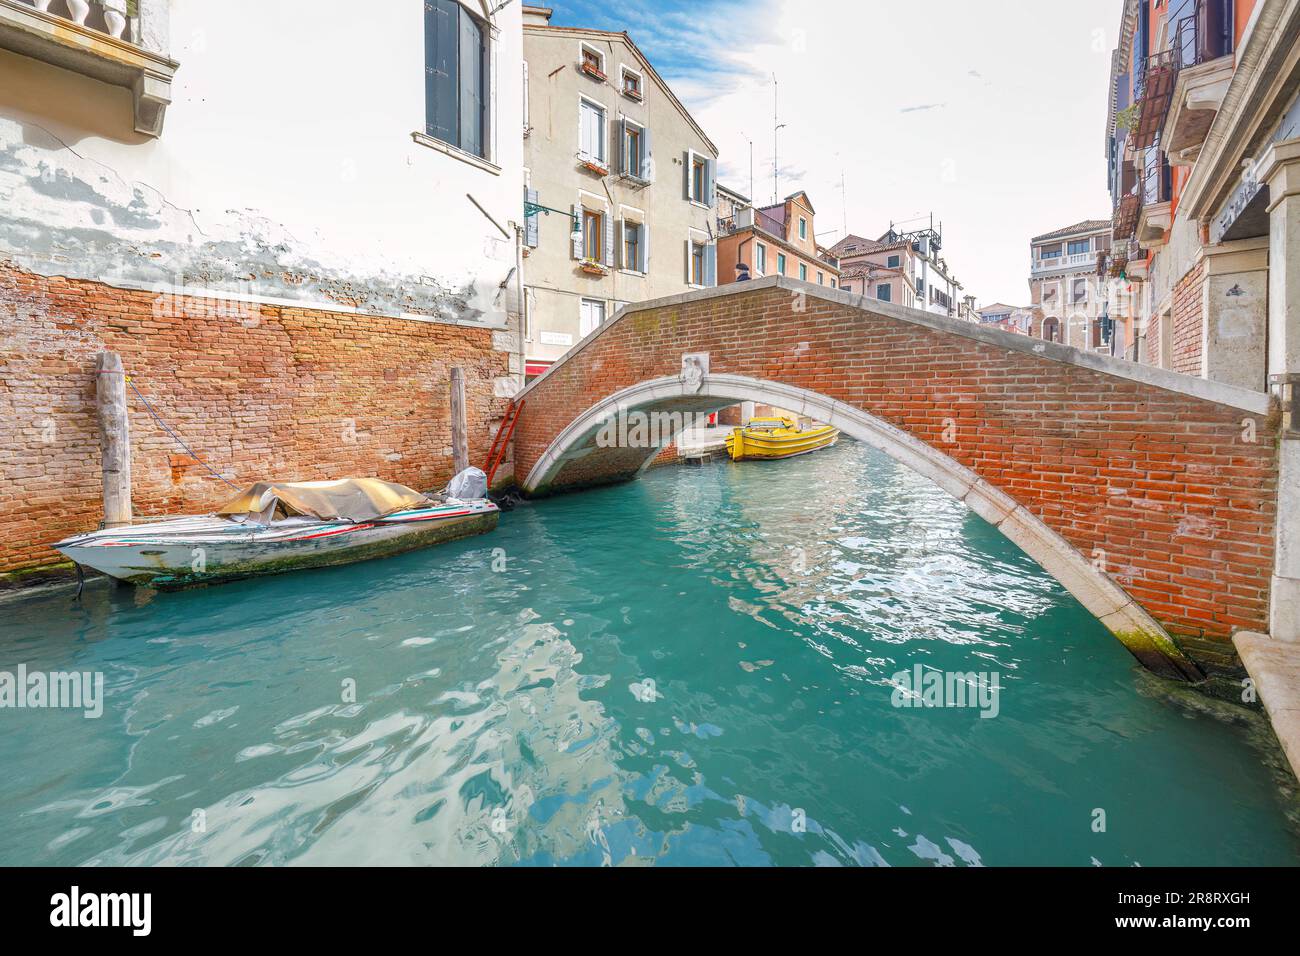 Stone bridge over the canal in Venice, Italy, Europe. Stock Photo